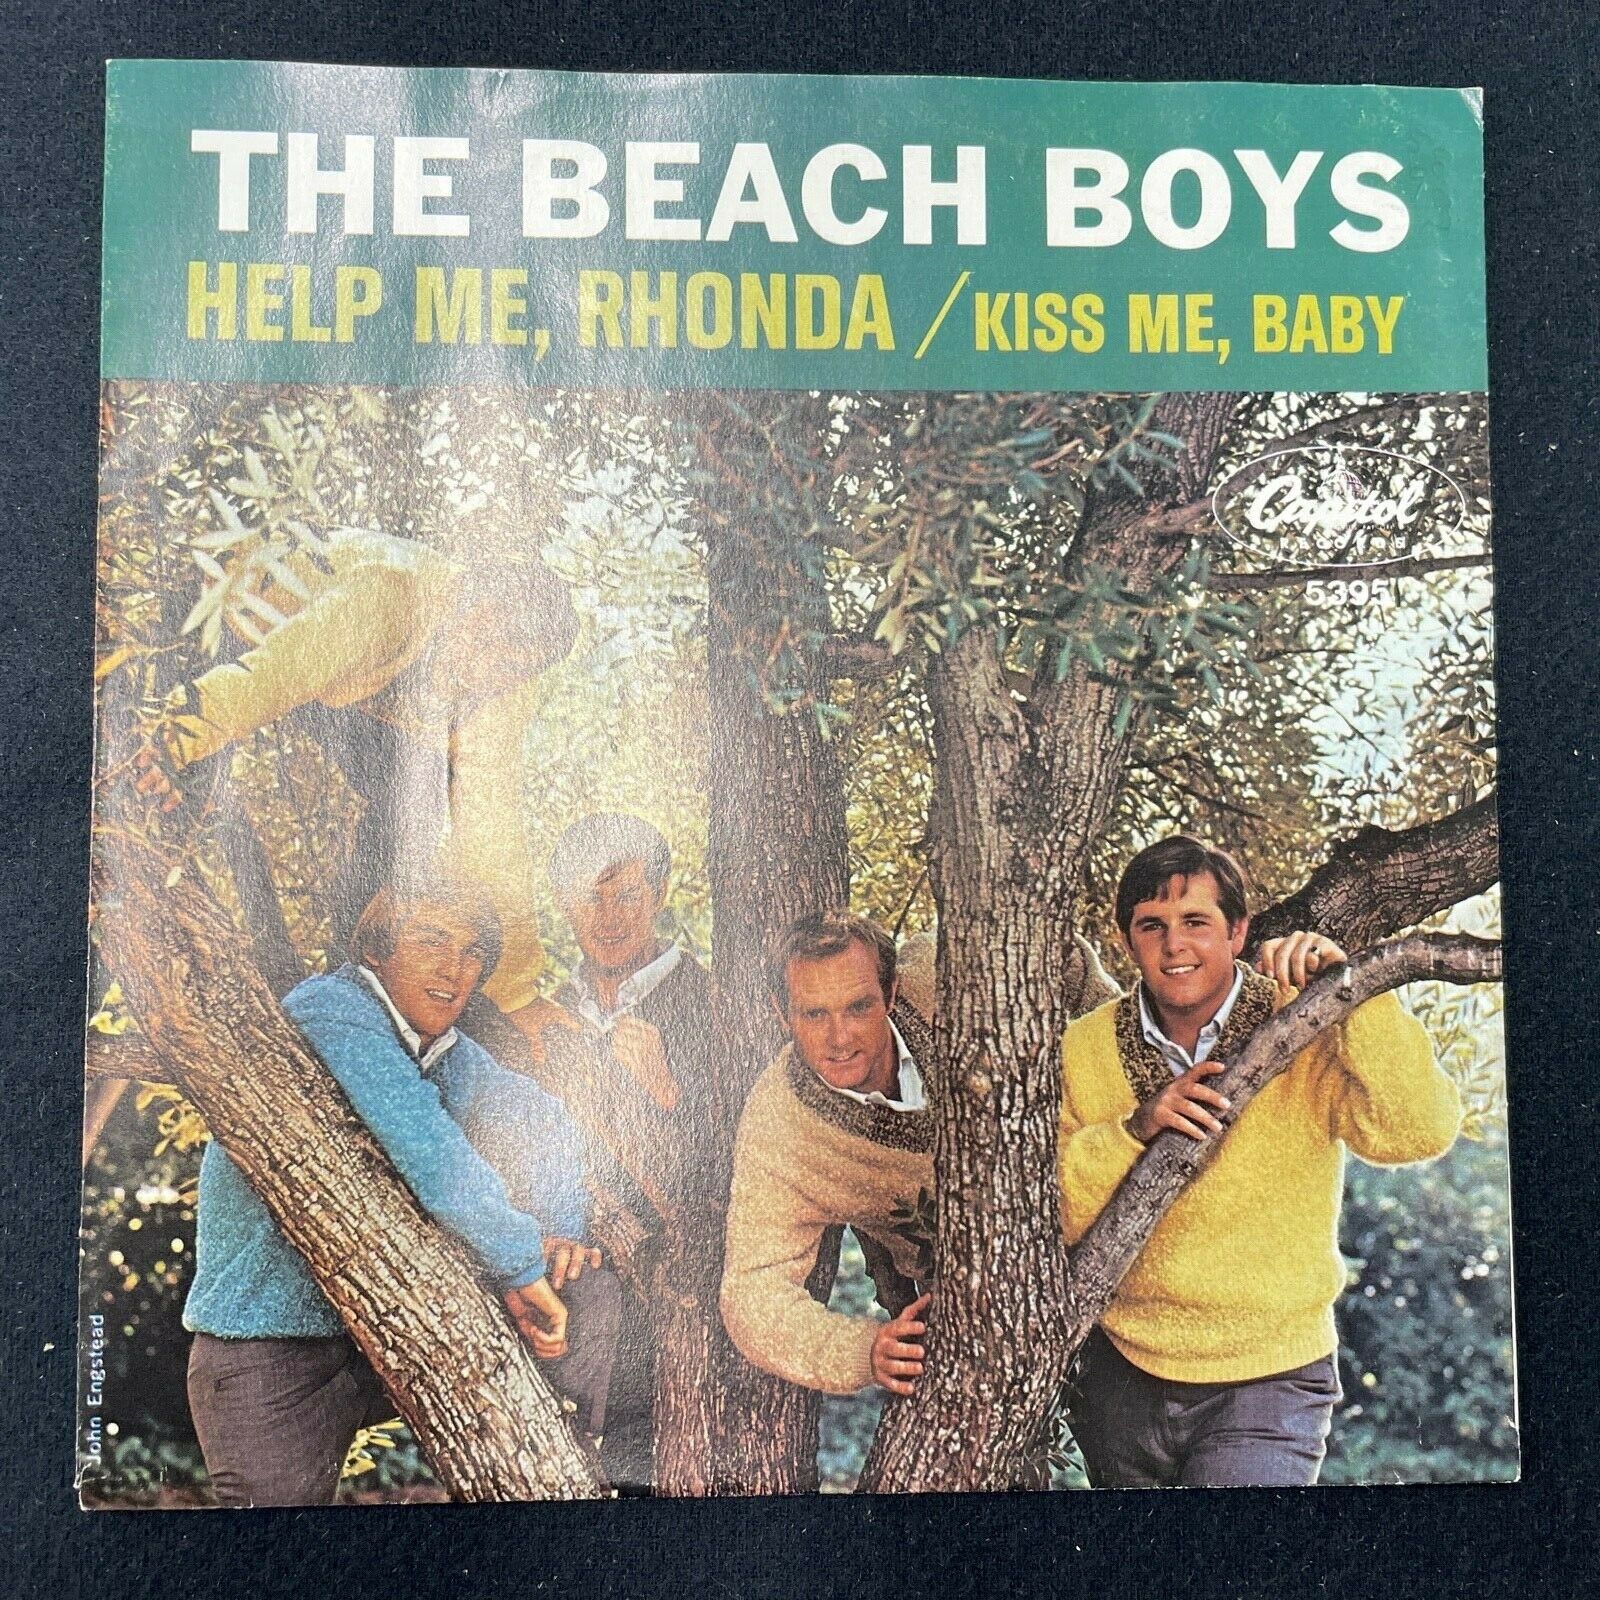 popsike.com - The Beach Boys - Help Me, Rhonda / Kiss Me, Baby - Capitol 45  Picture Sleeve - auction details